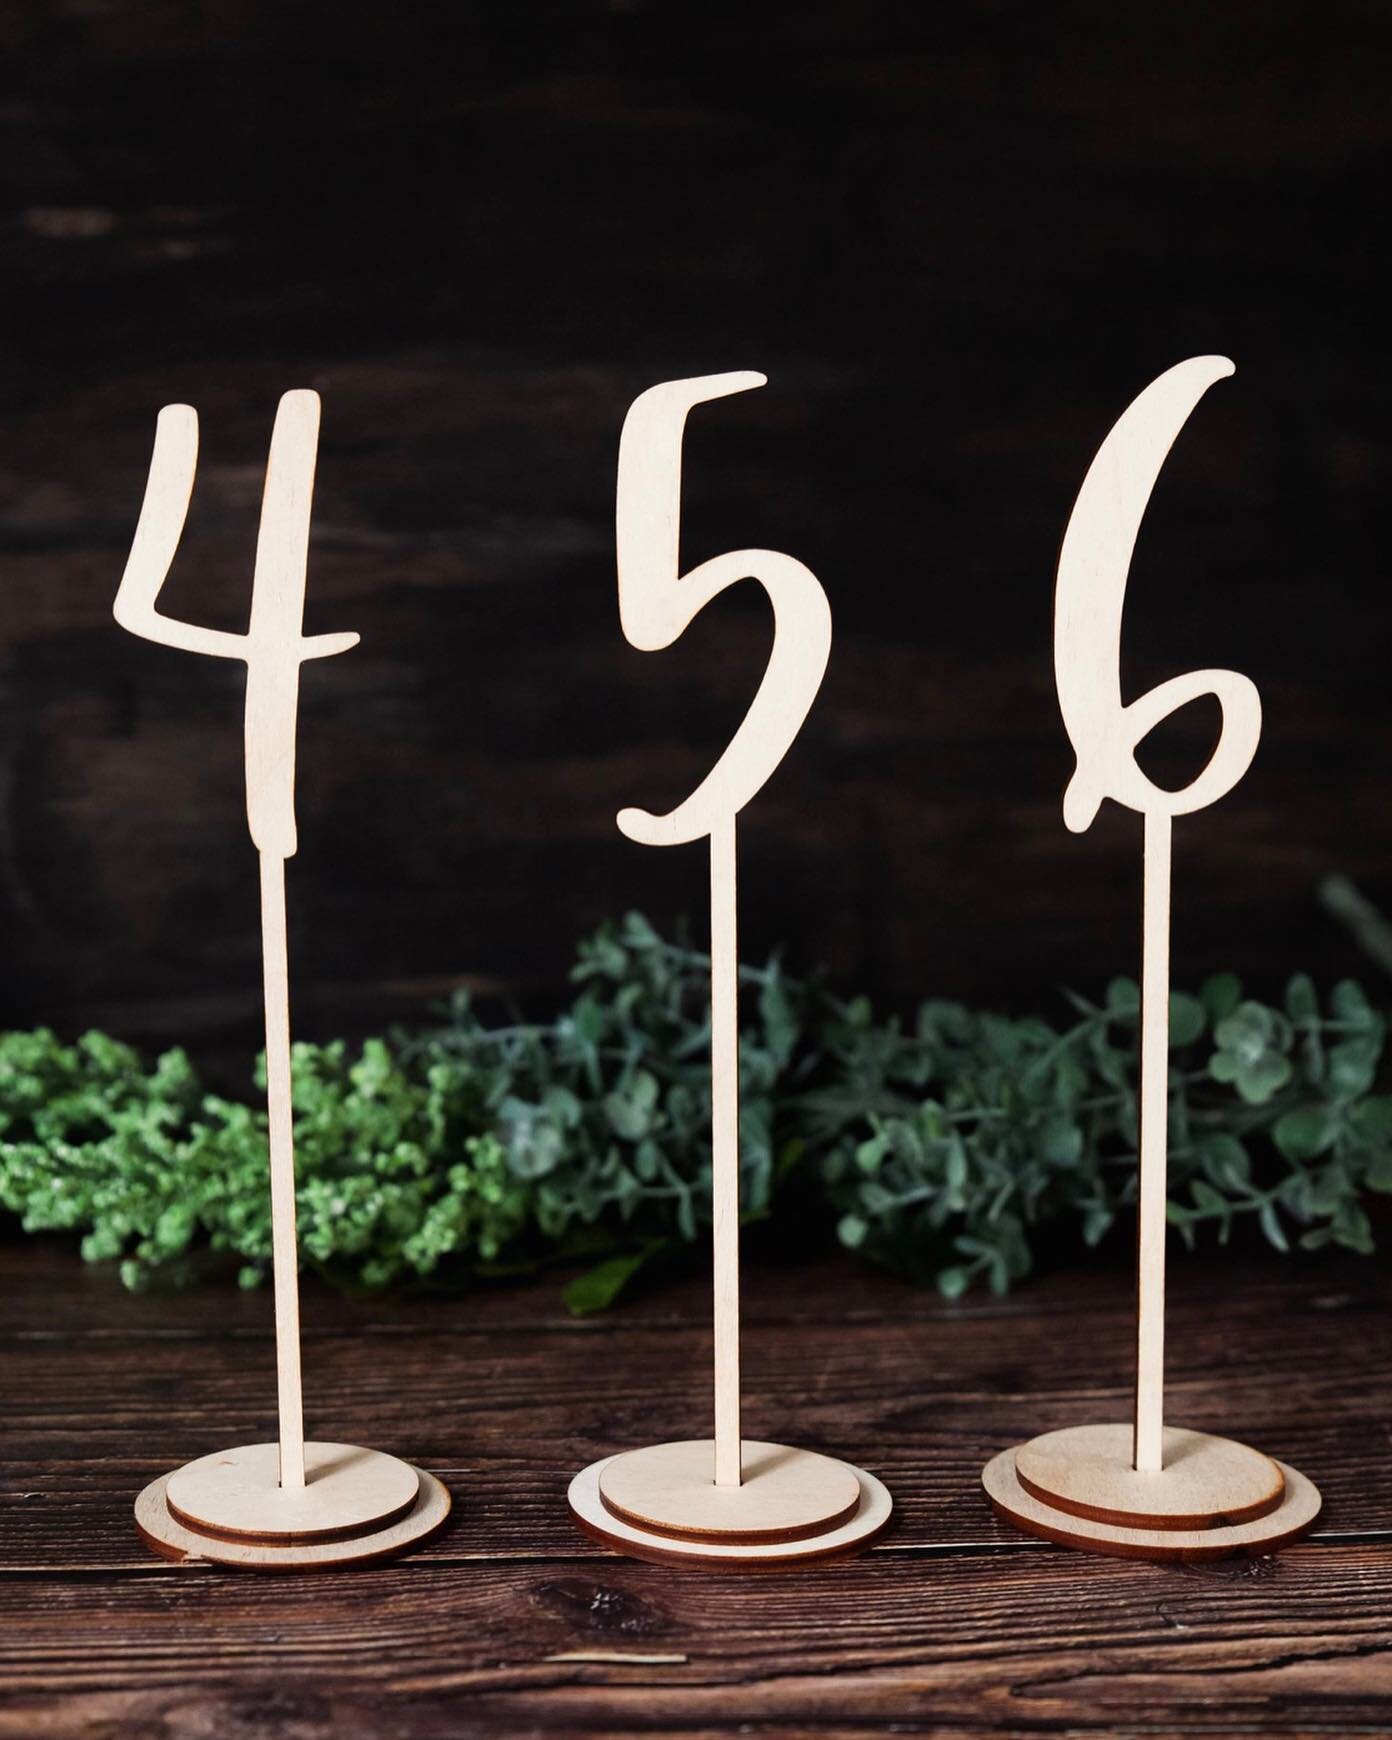 This Long stick numerical wedding sign will be a perfect addition to your table decoration. Its elegant design and numerical display will not only add a touch of sophistication to your wedding ambiance but also serve as a practical and stylish way to